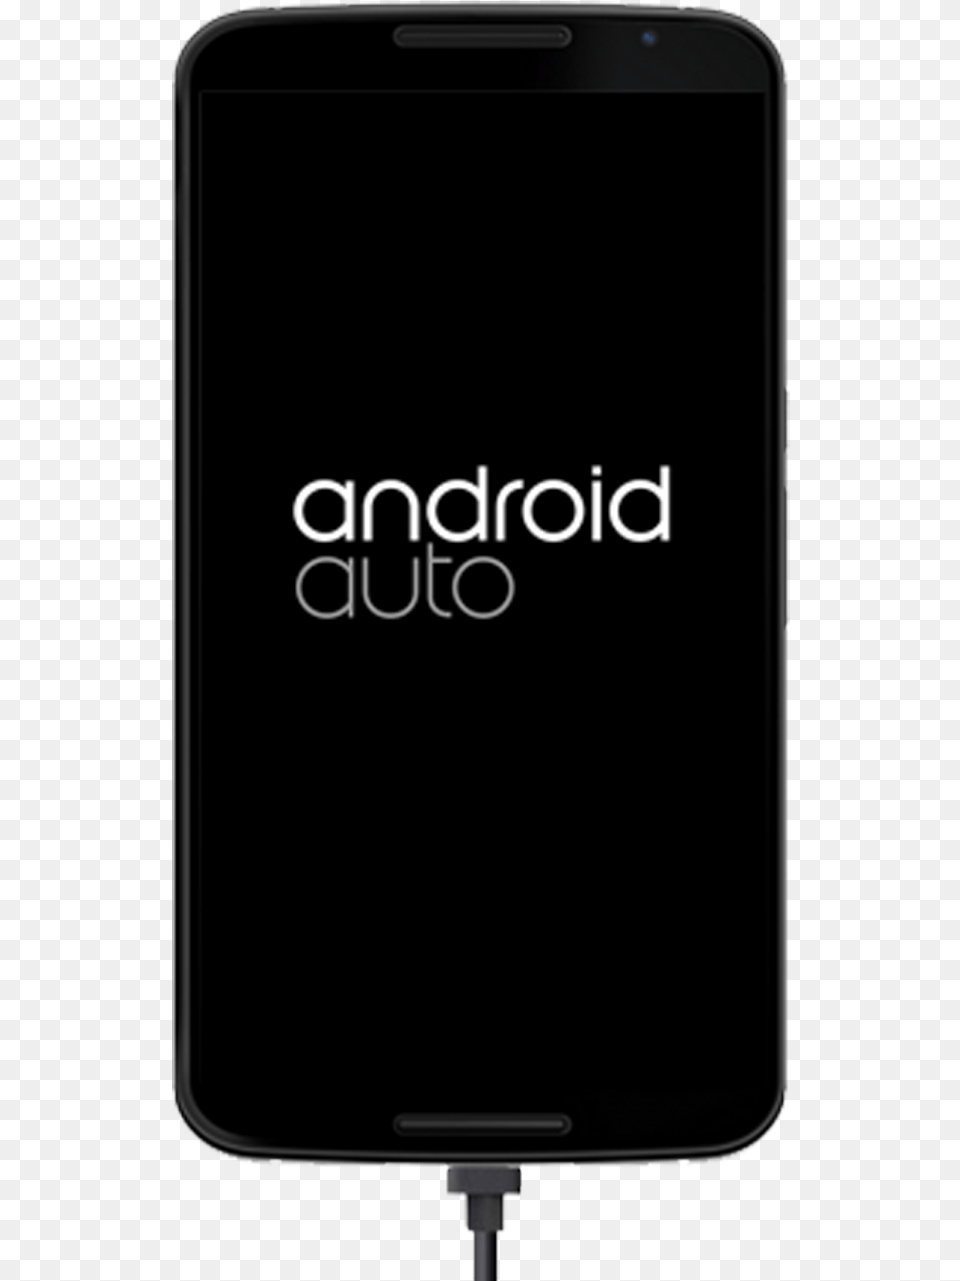 Android Auto Android Auto On Android Phone, Electronics, Mobile Phone Png